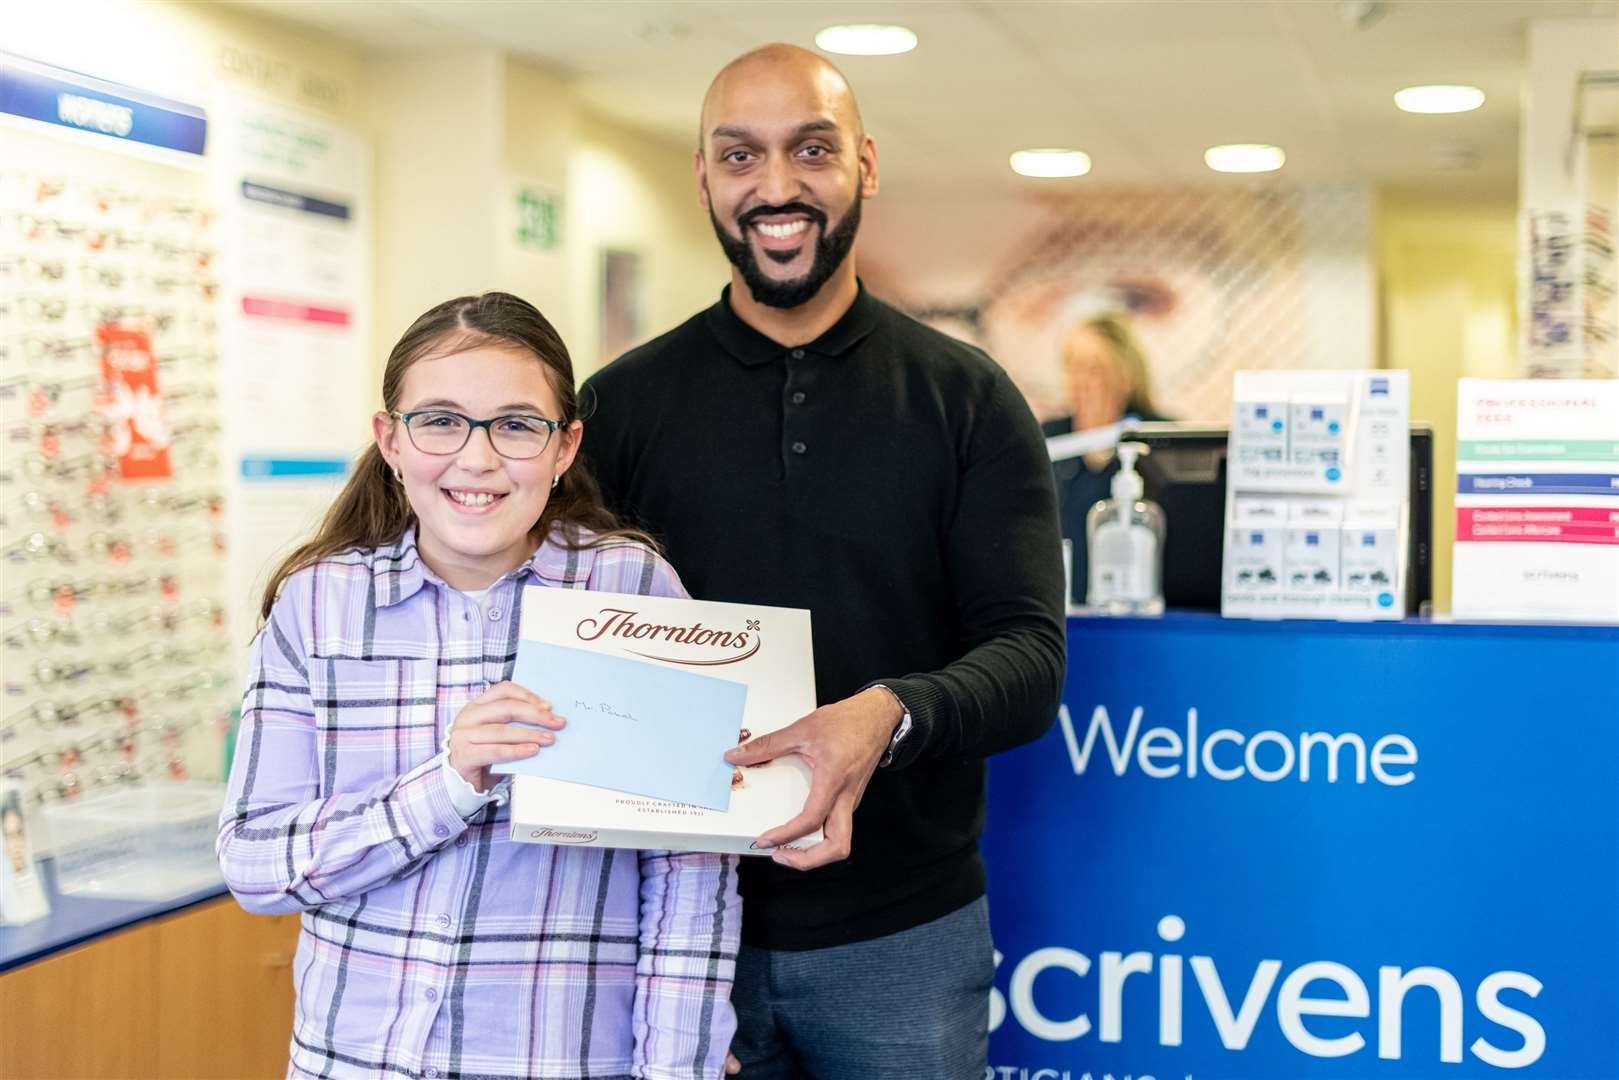 Poppy-May Leeds brought her optometrist Mrudang Patel at Scrivens, Herne Bay a box of chocolates to say thank you